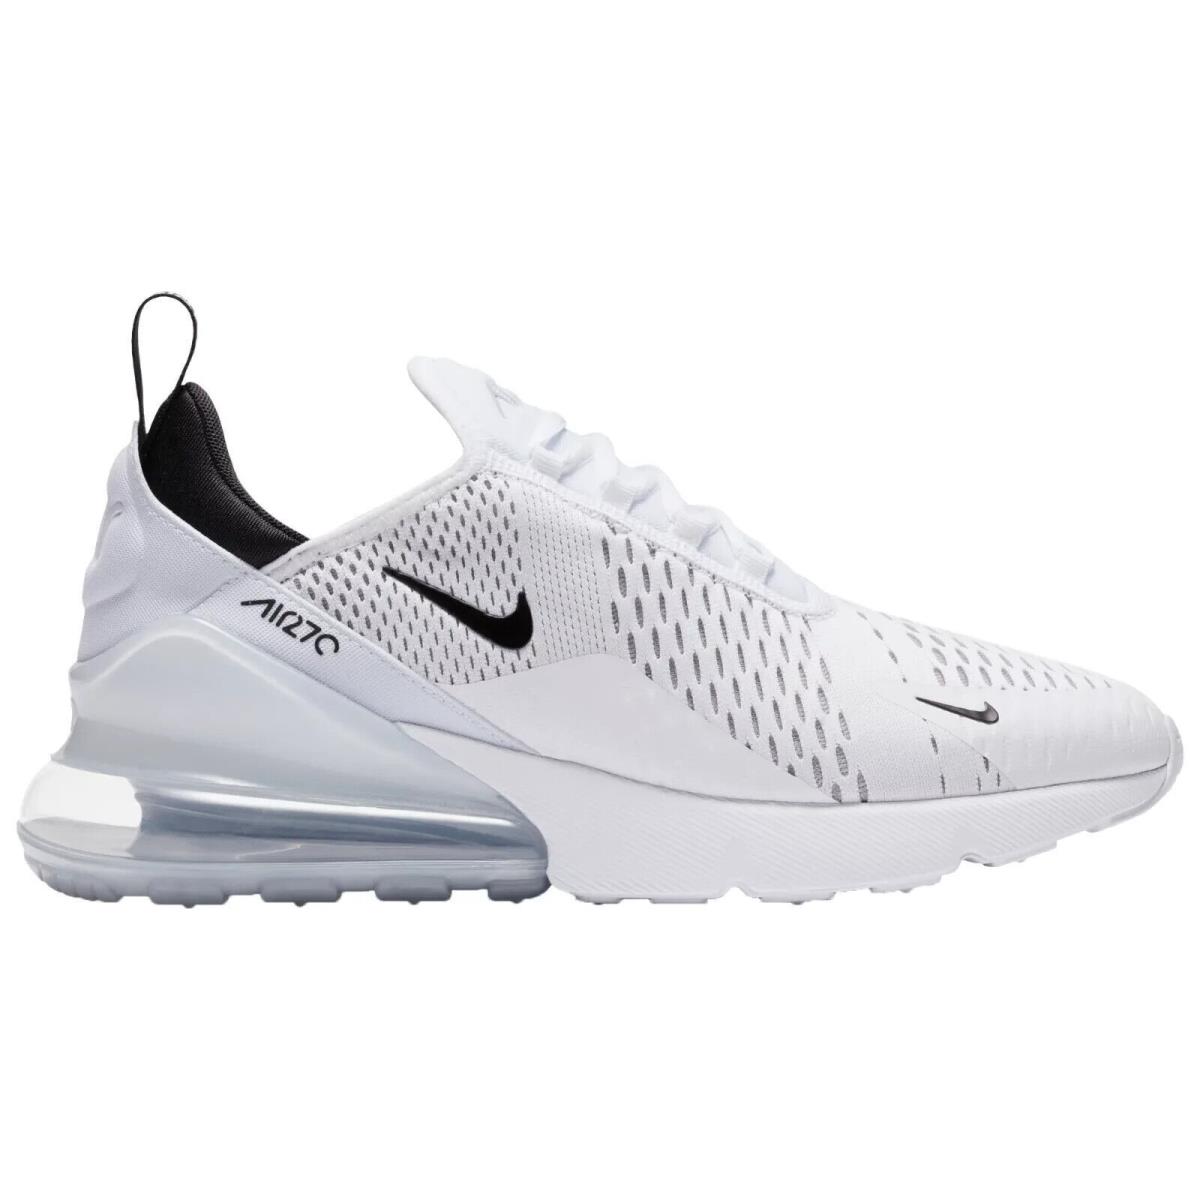 Nike Air Max 270 Men`s Casual Shoes All Colors US Sizes 7-14 White/White/Black